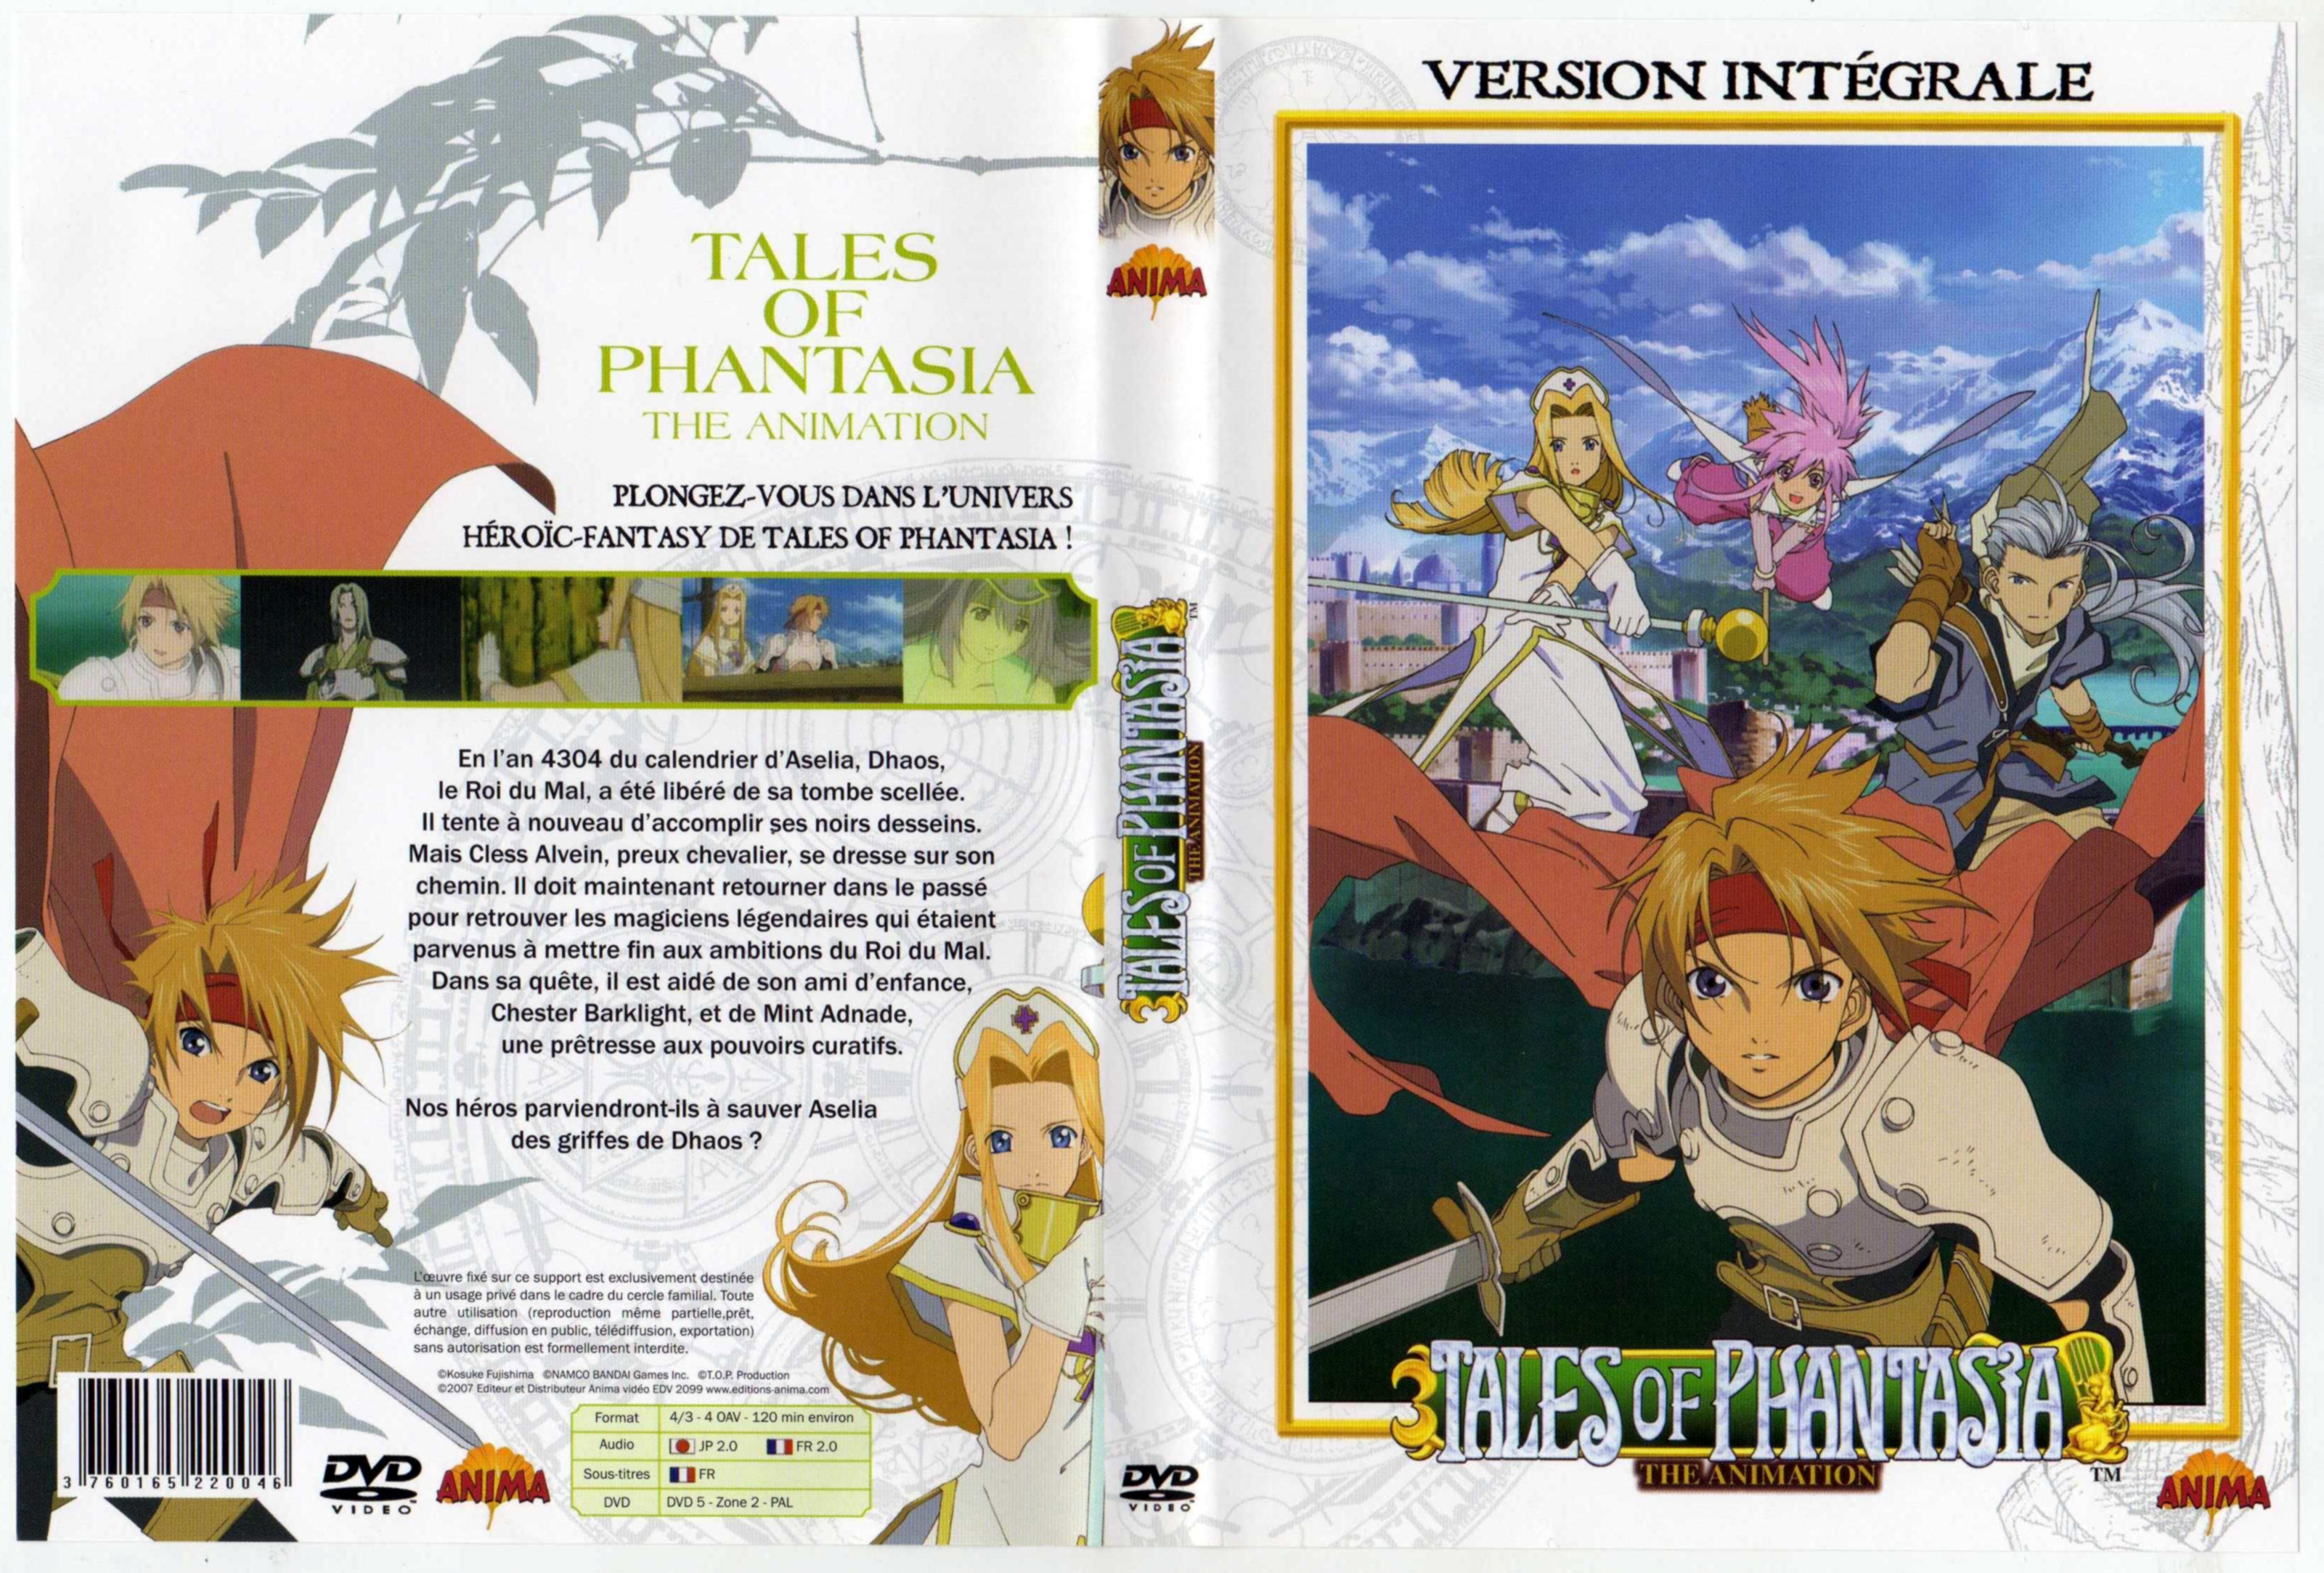 Jaquette DVD Tales of Phantasia The animation